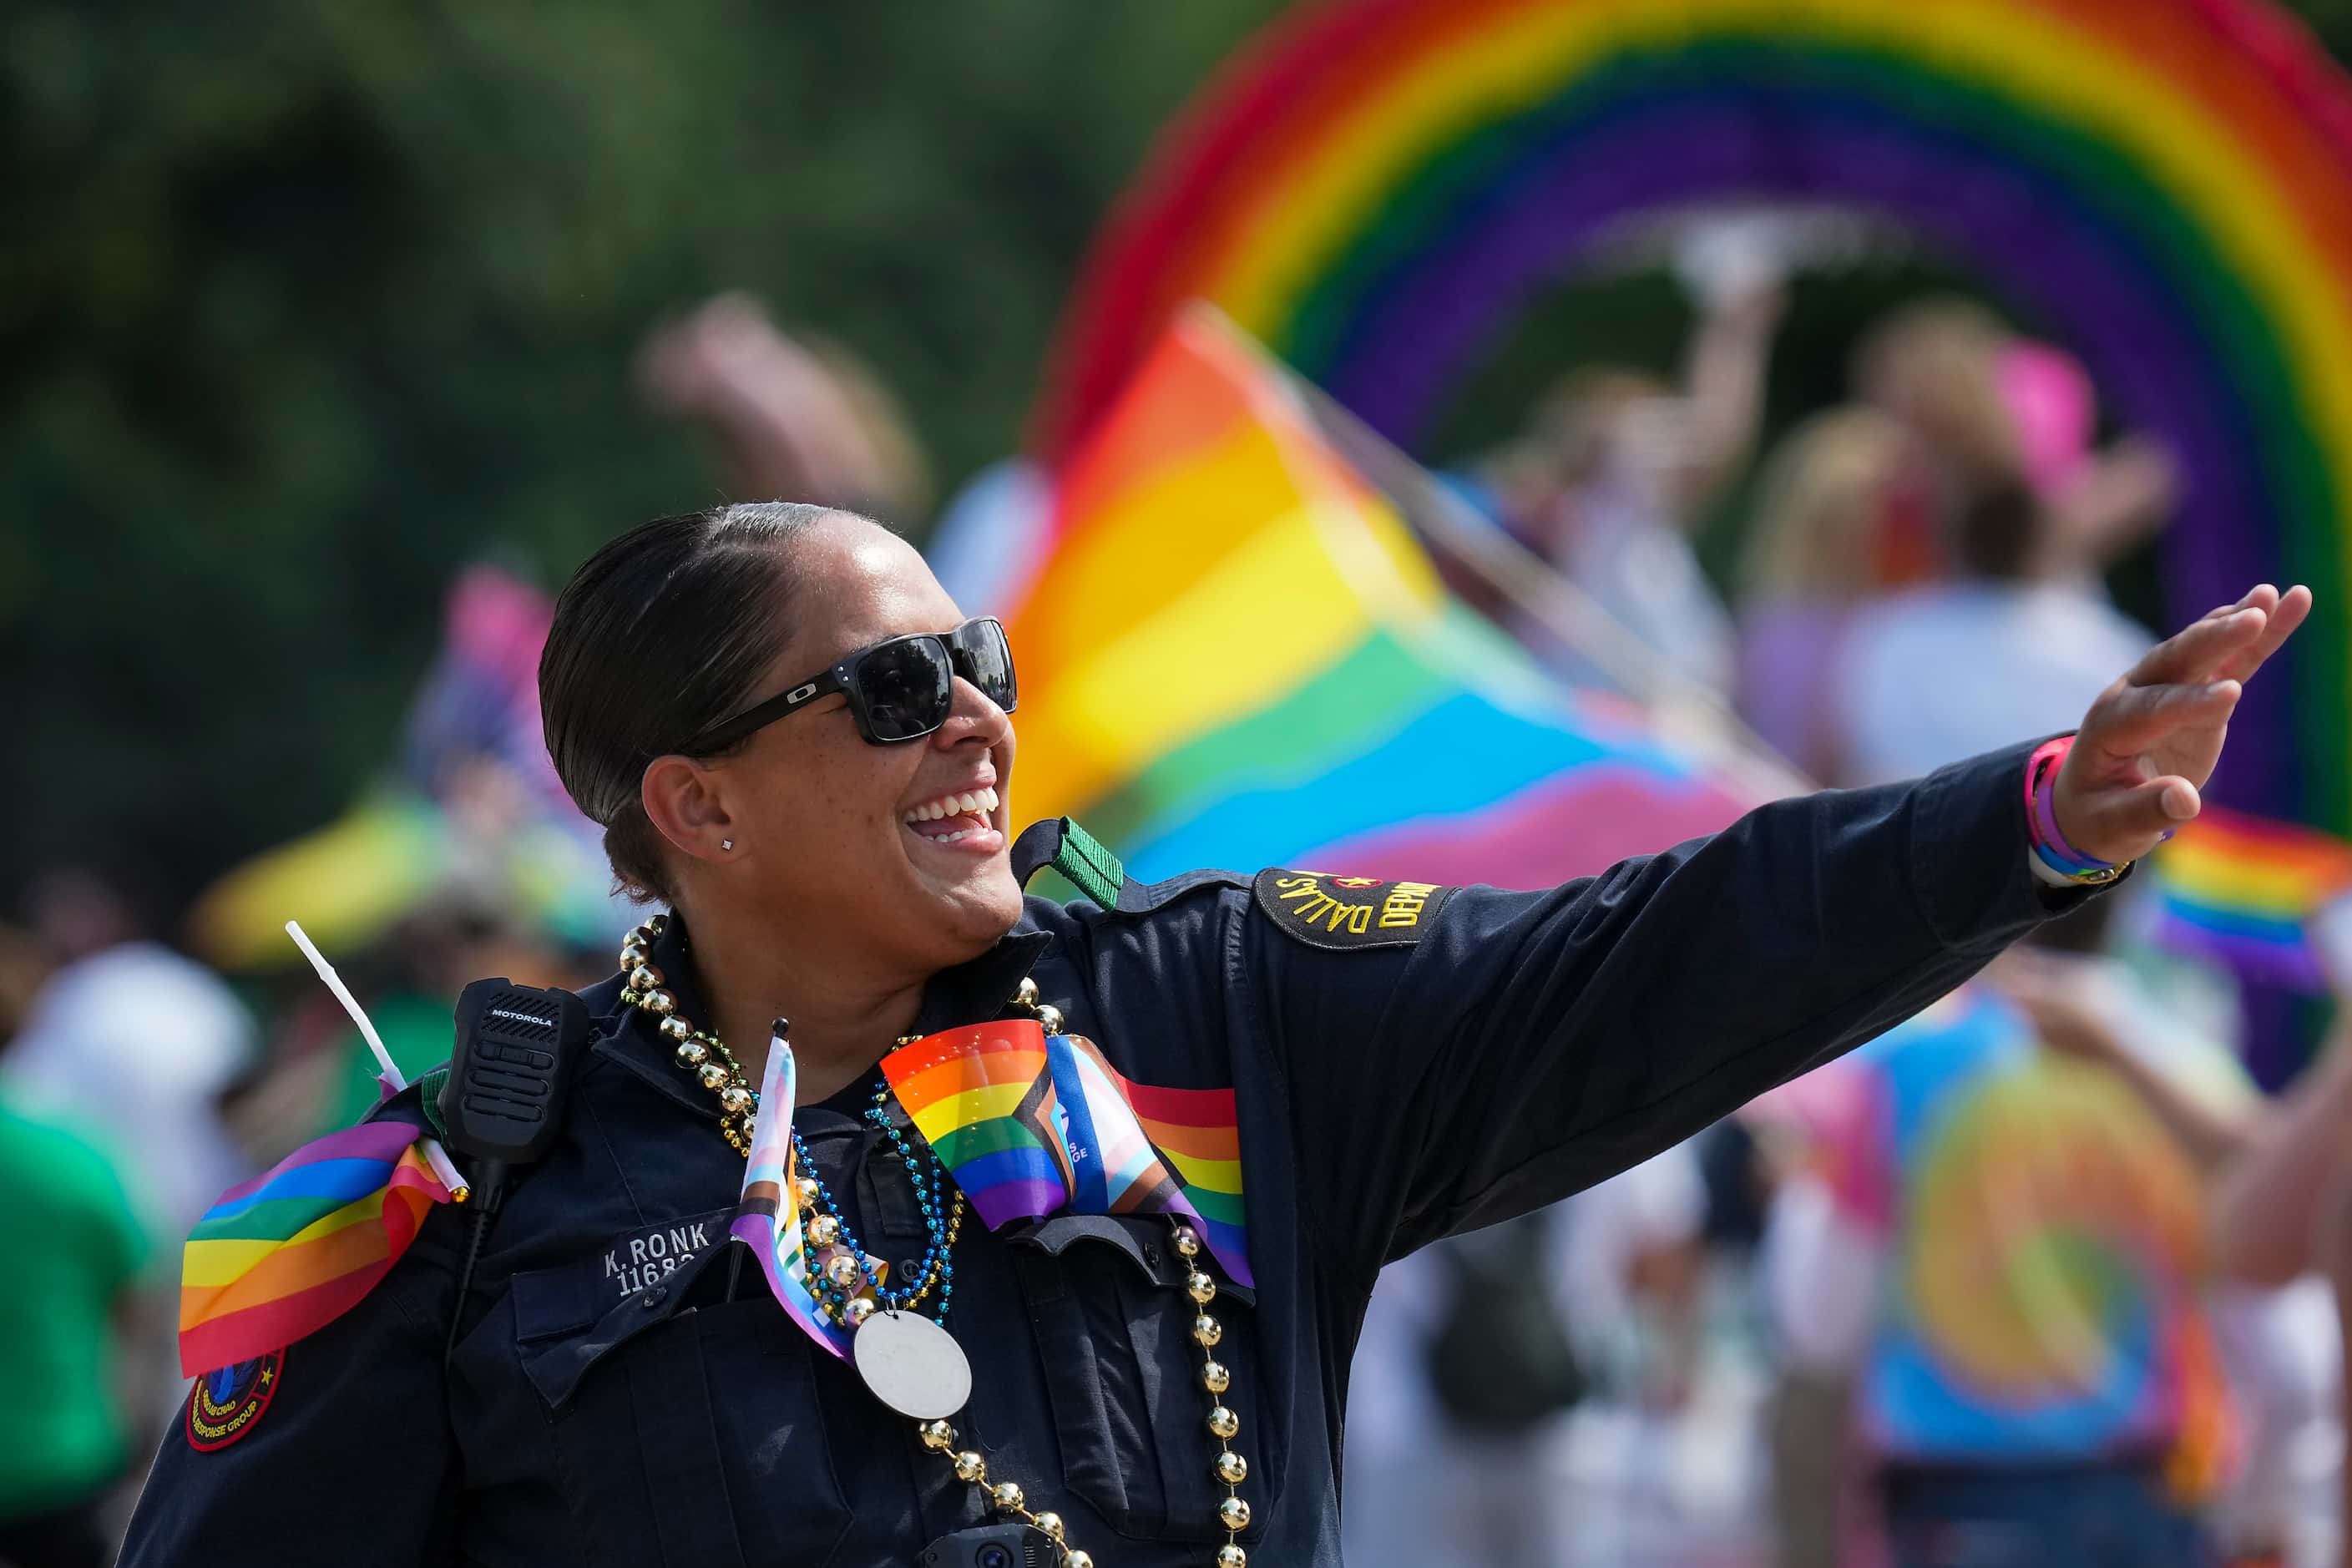 Dallas police officer K. Ronk waves to participants as they march through Fair Park during...